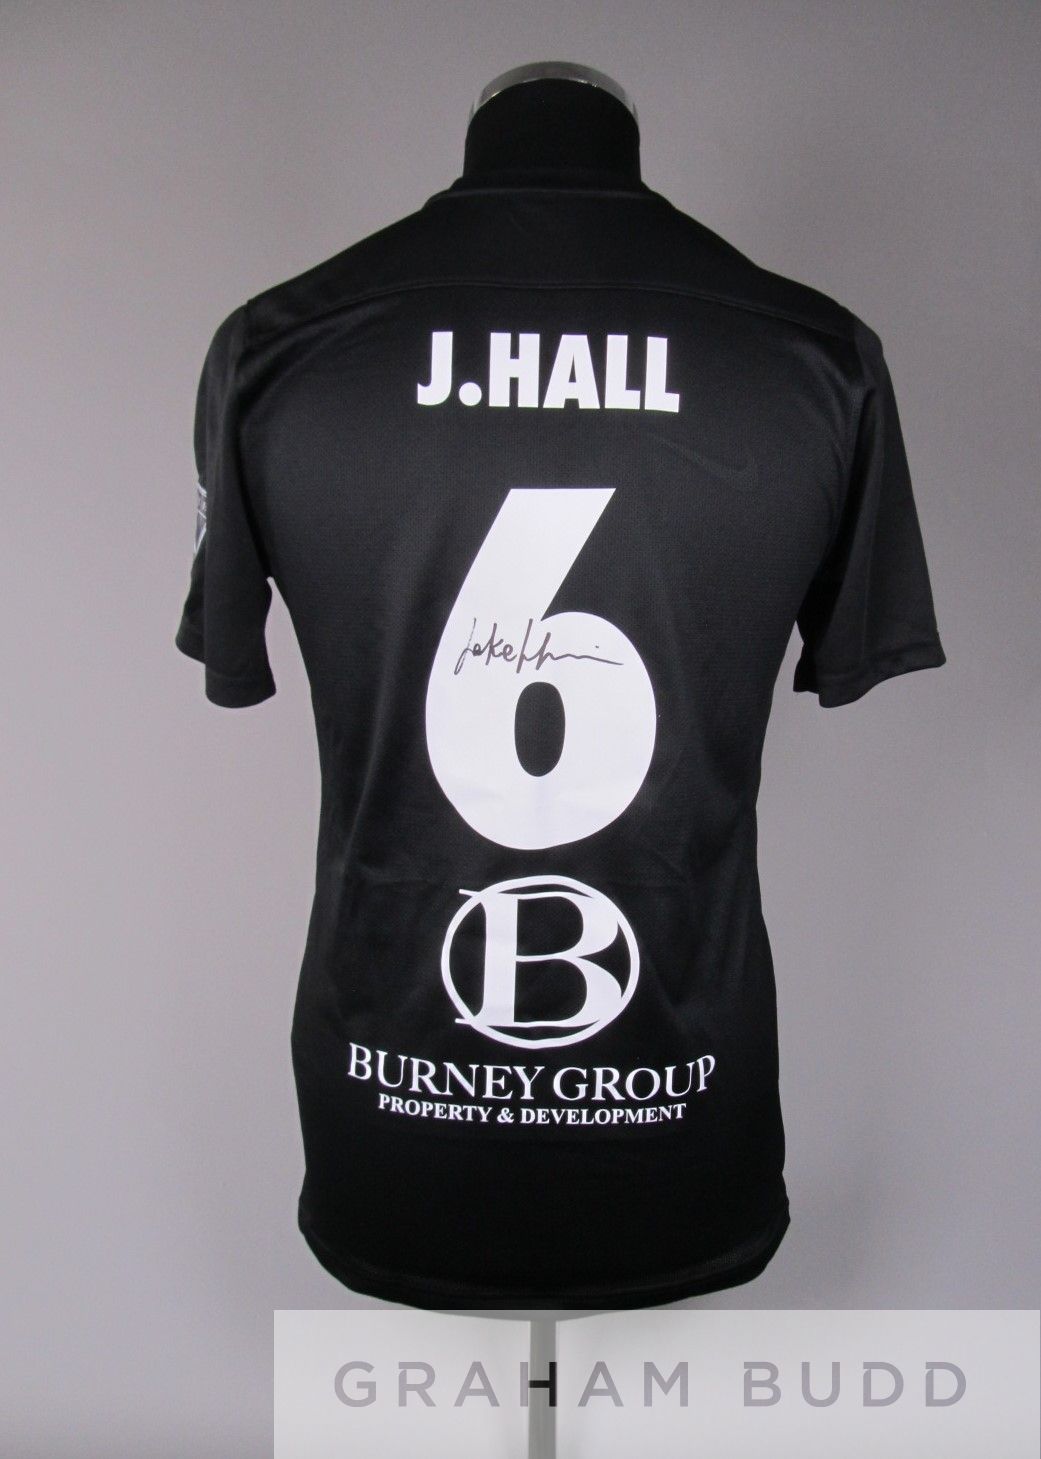 Jake Hall signed Charlie Dukes Memorial Cup no.6 shirt Spurs Charity XI vs Celebrity Invitational XI - Image 2 of 3